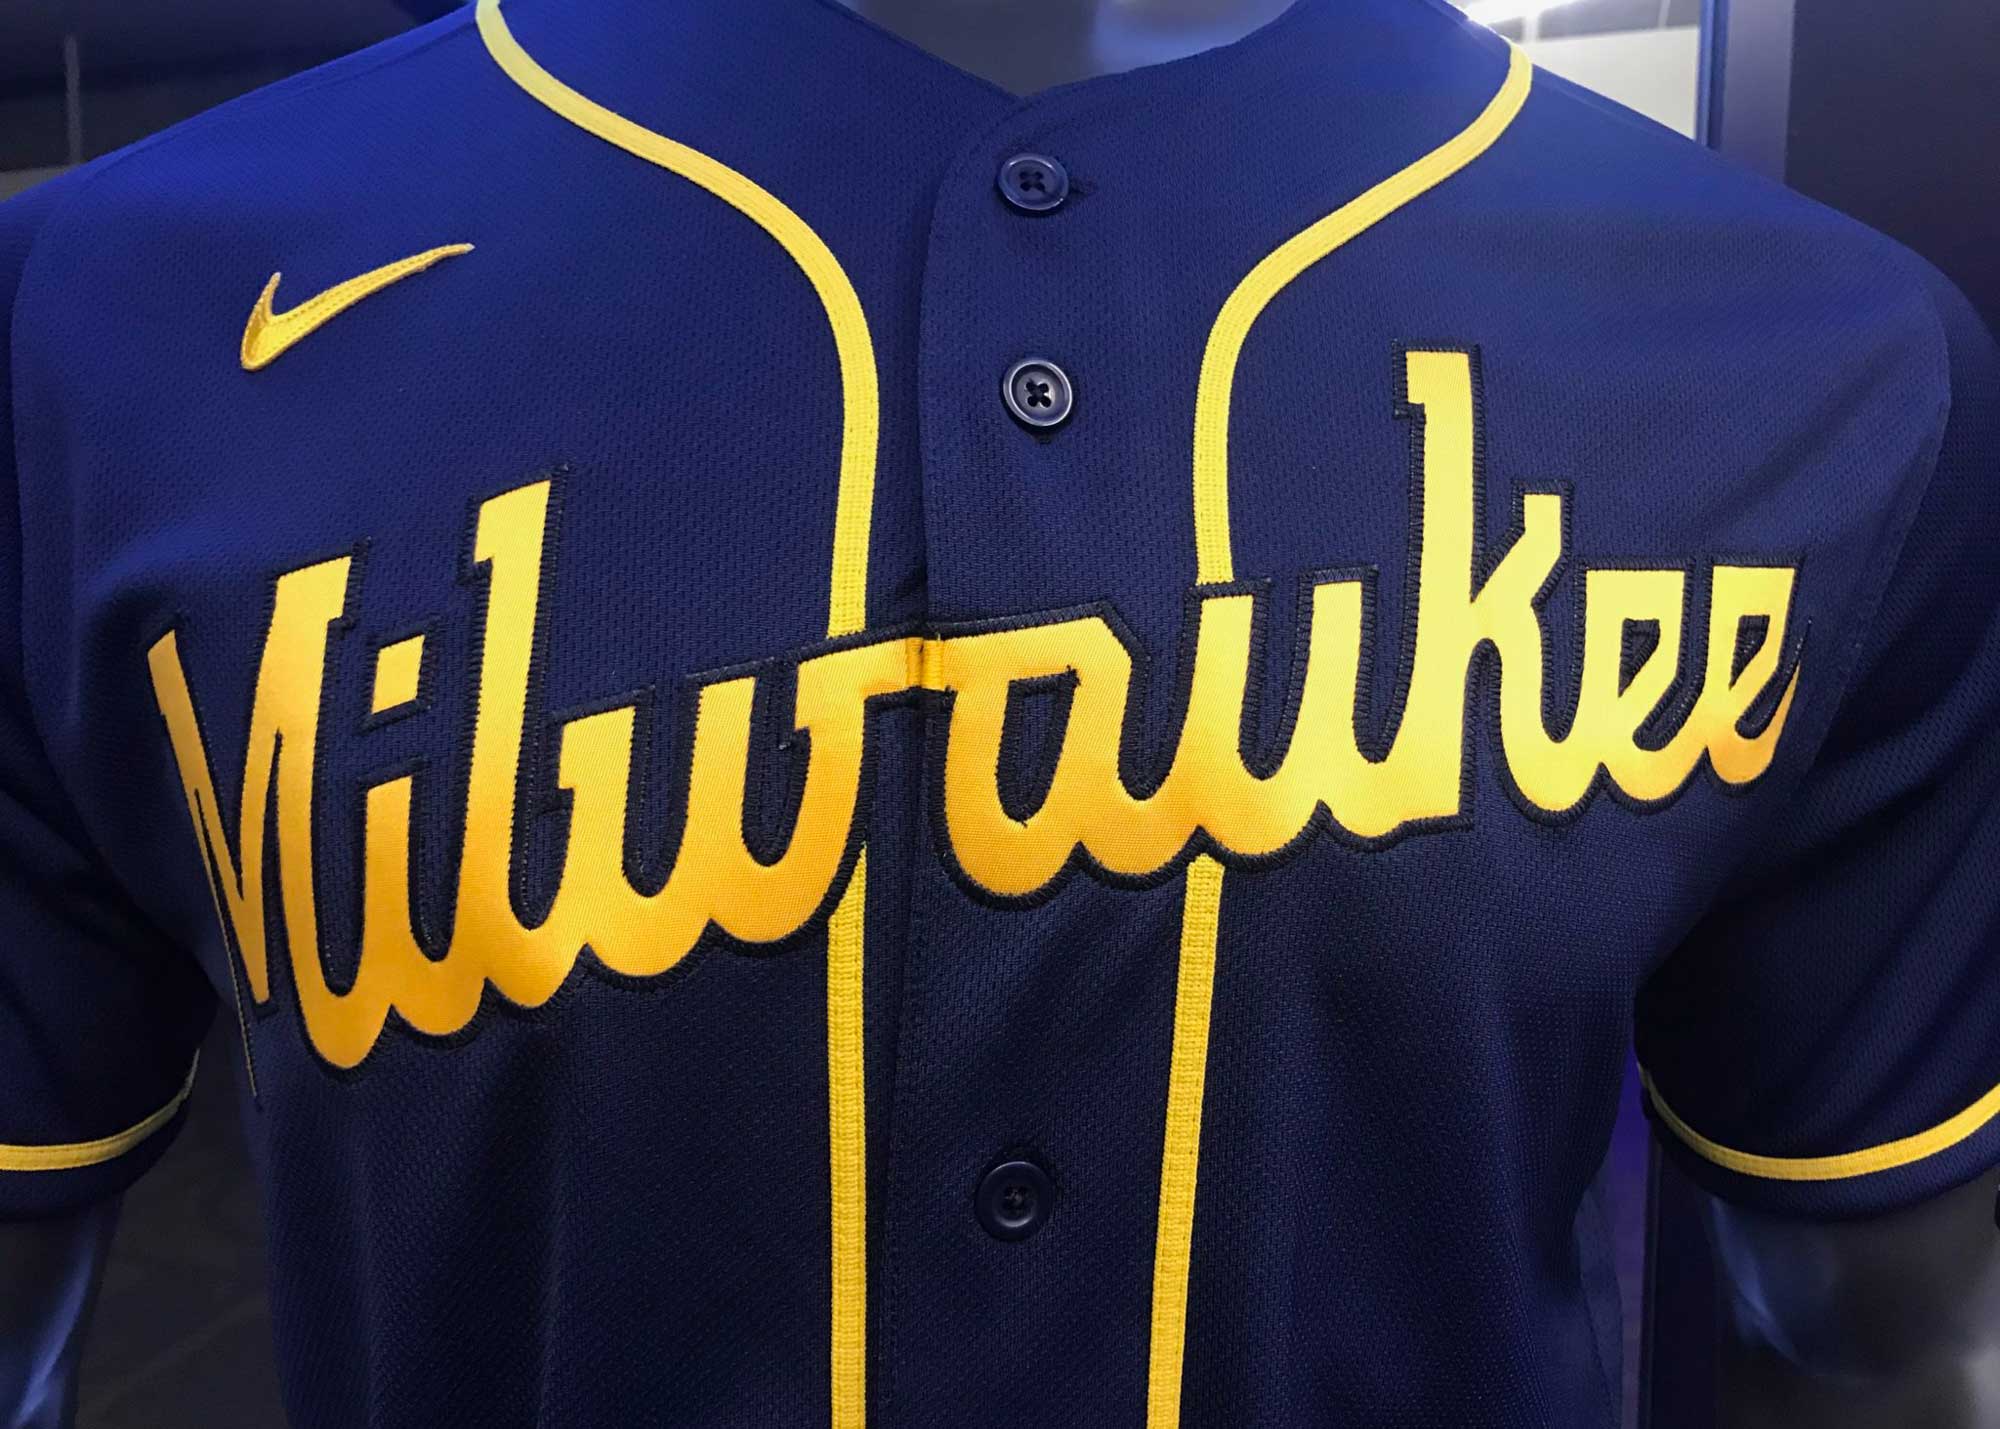 new brewers jersey